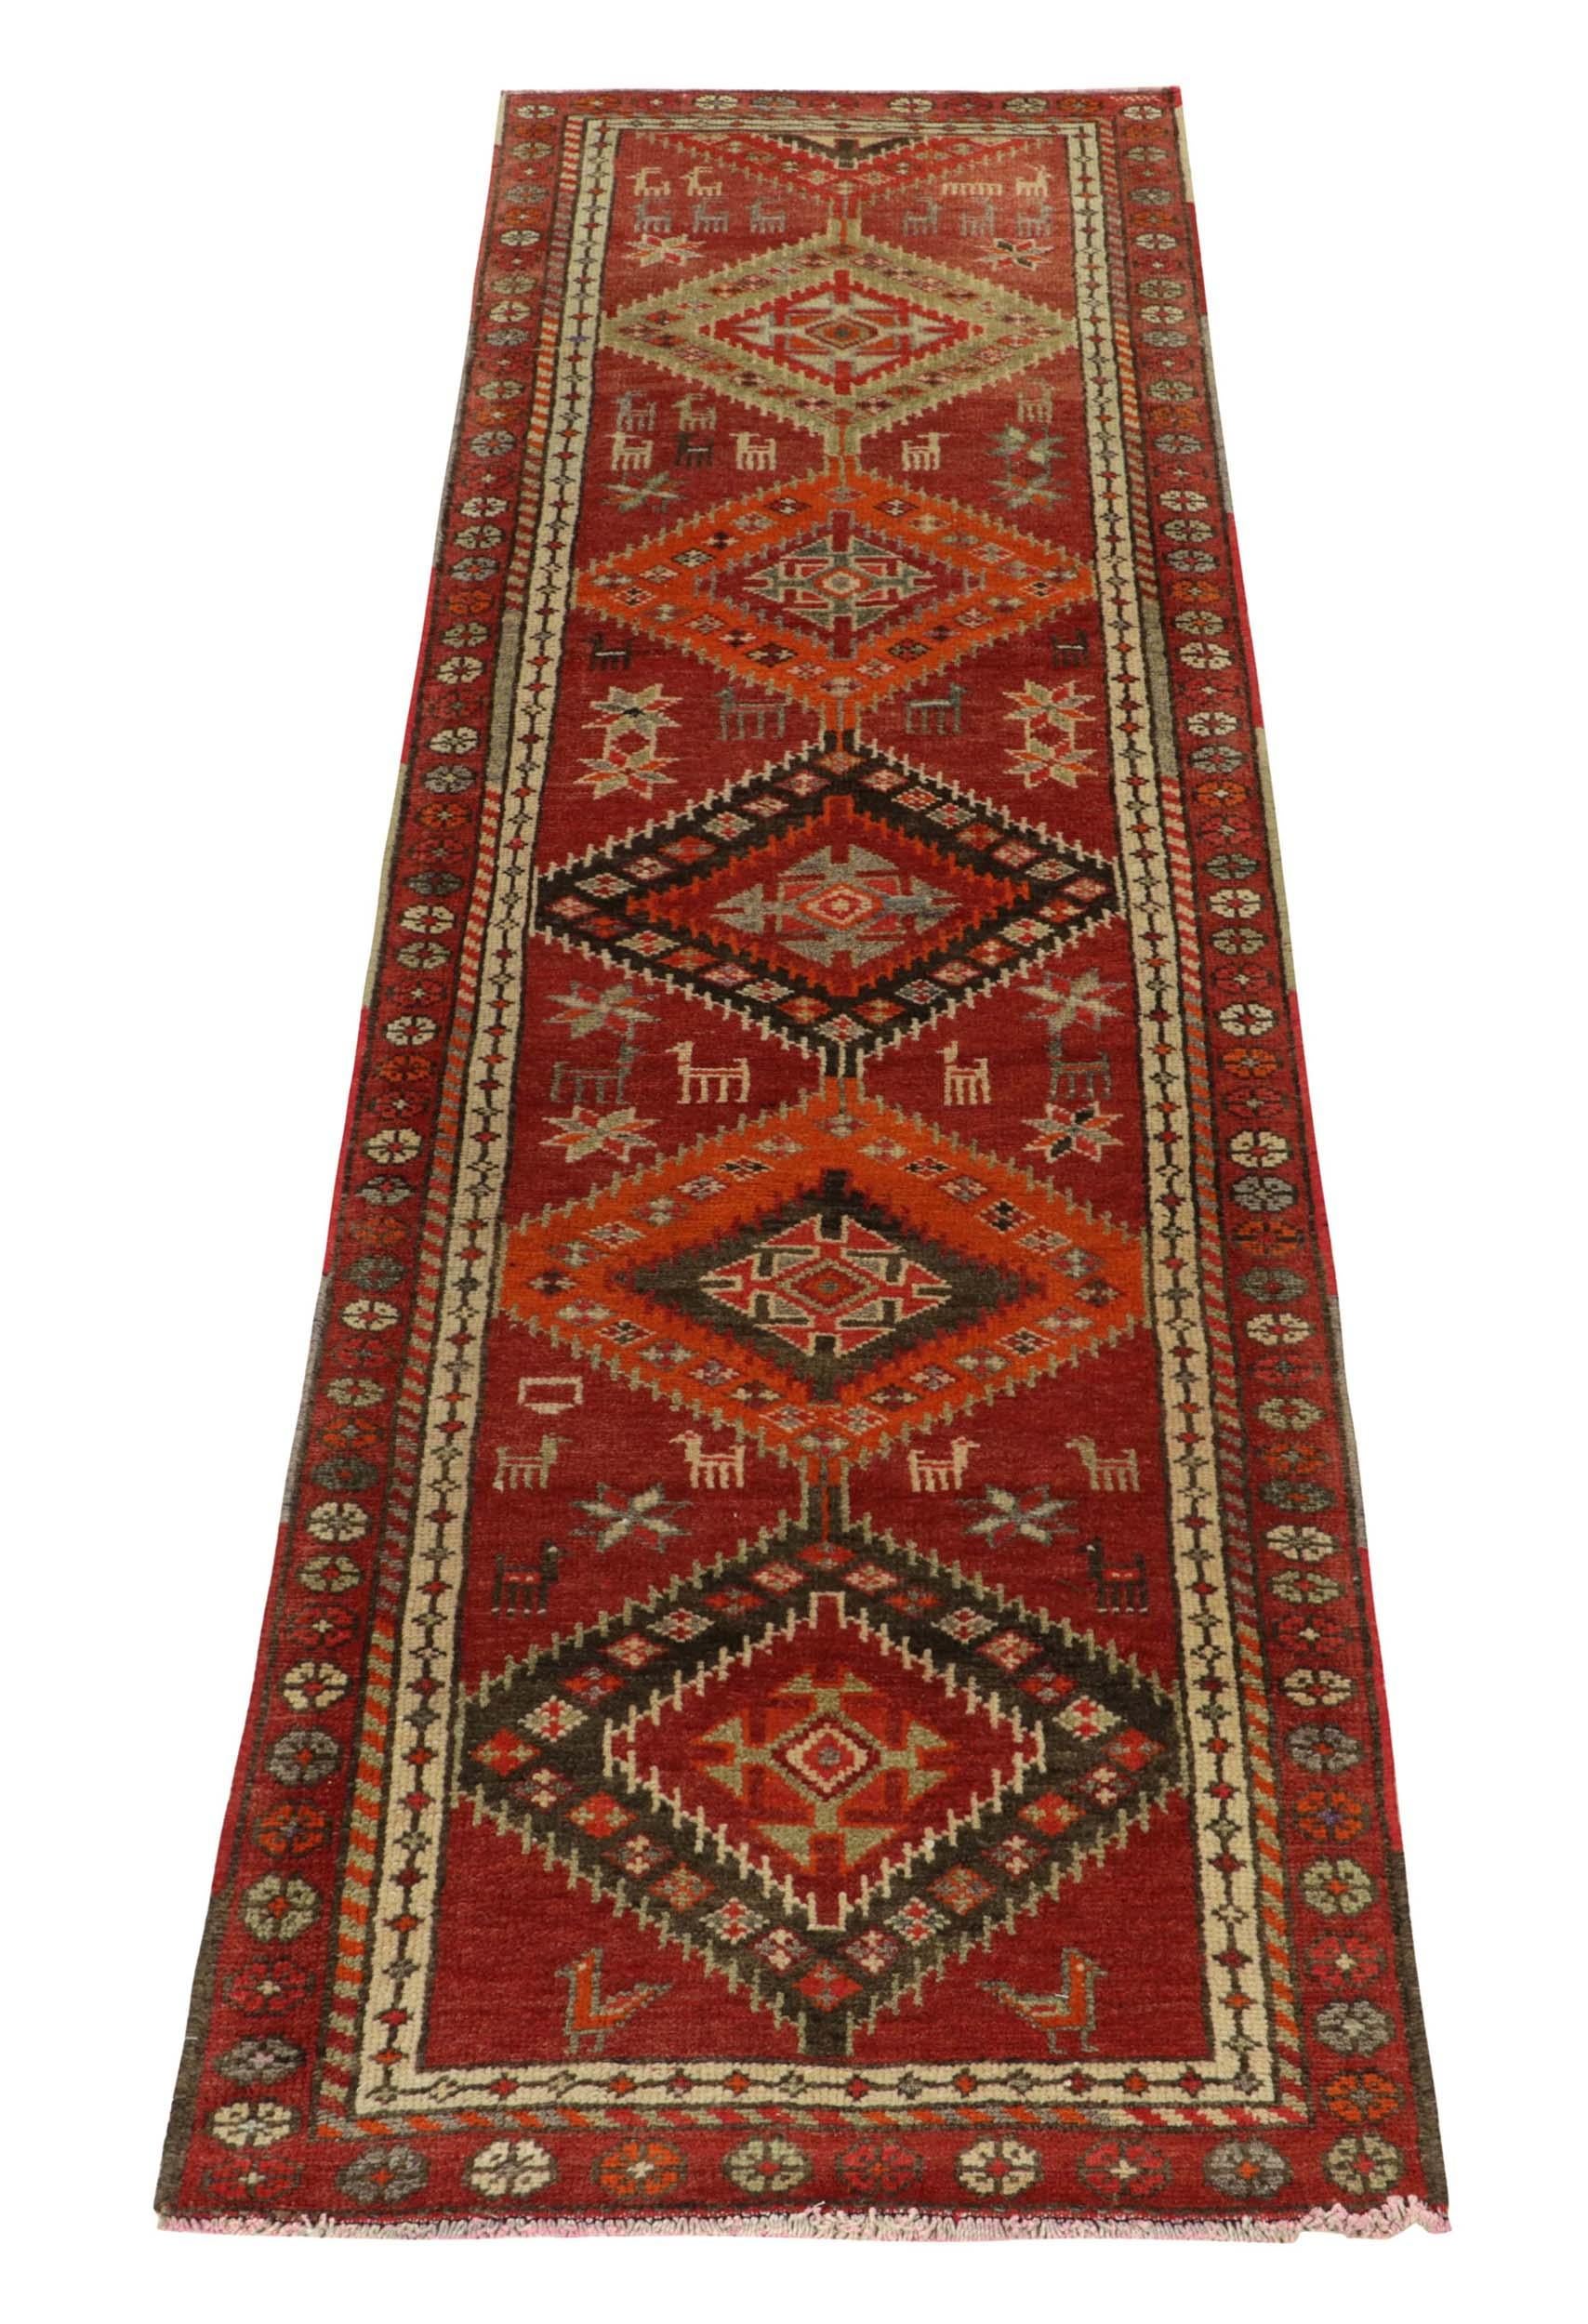 Hand-knotted in wool, a 3x10 runner from Rug & Kilim’s latest prominent curation of distinguished tribal pieces. 

Originating from Turkey circa 1950-1960, the drawing relishes a symmetric diamond pattern with traditional motifs & animal imagery